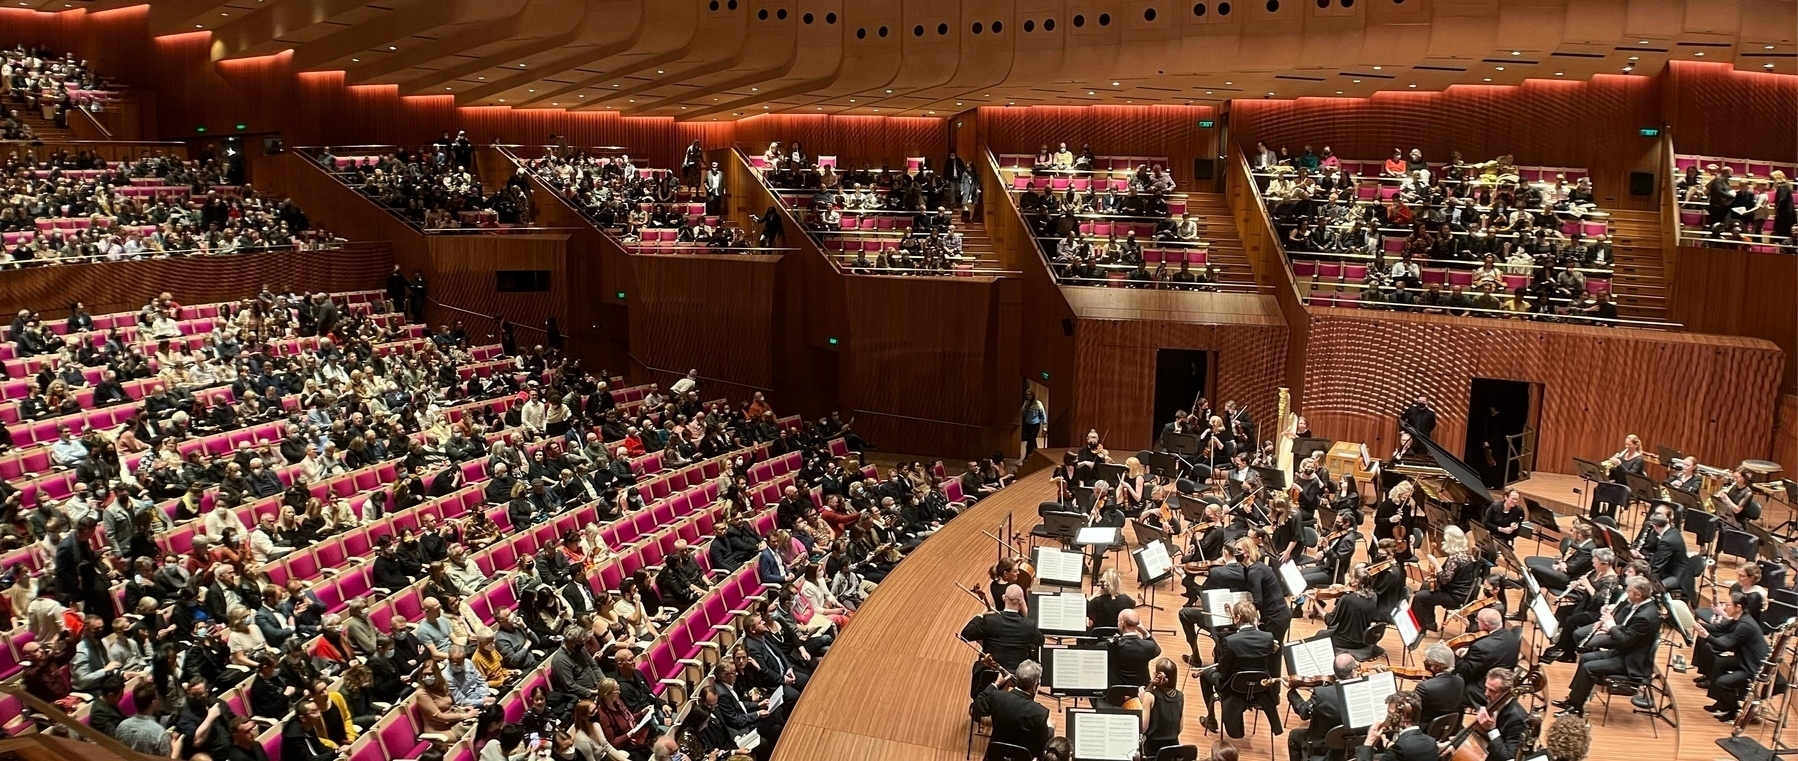 Audience files into the Sydney Opera House Concert Hall